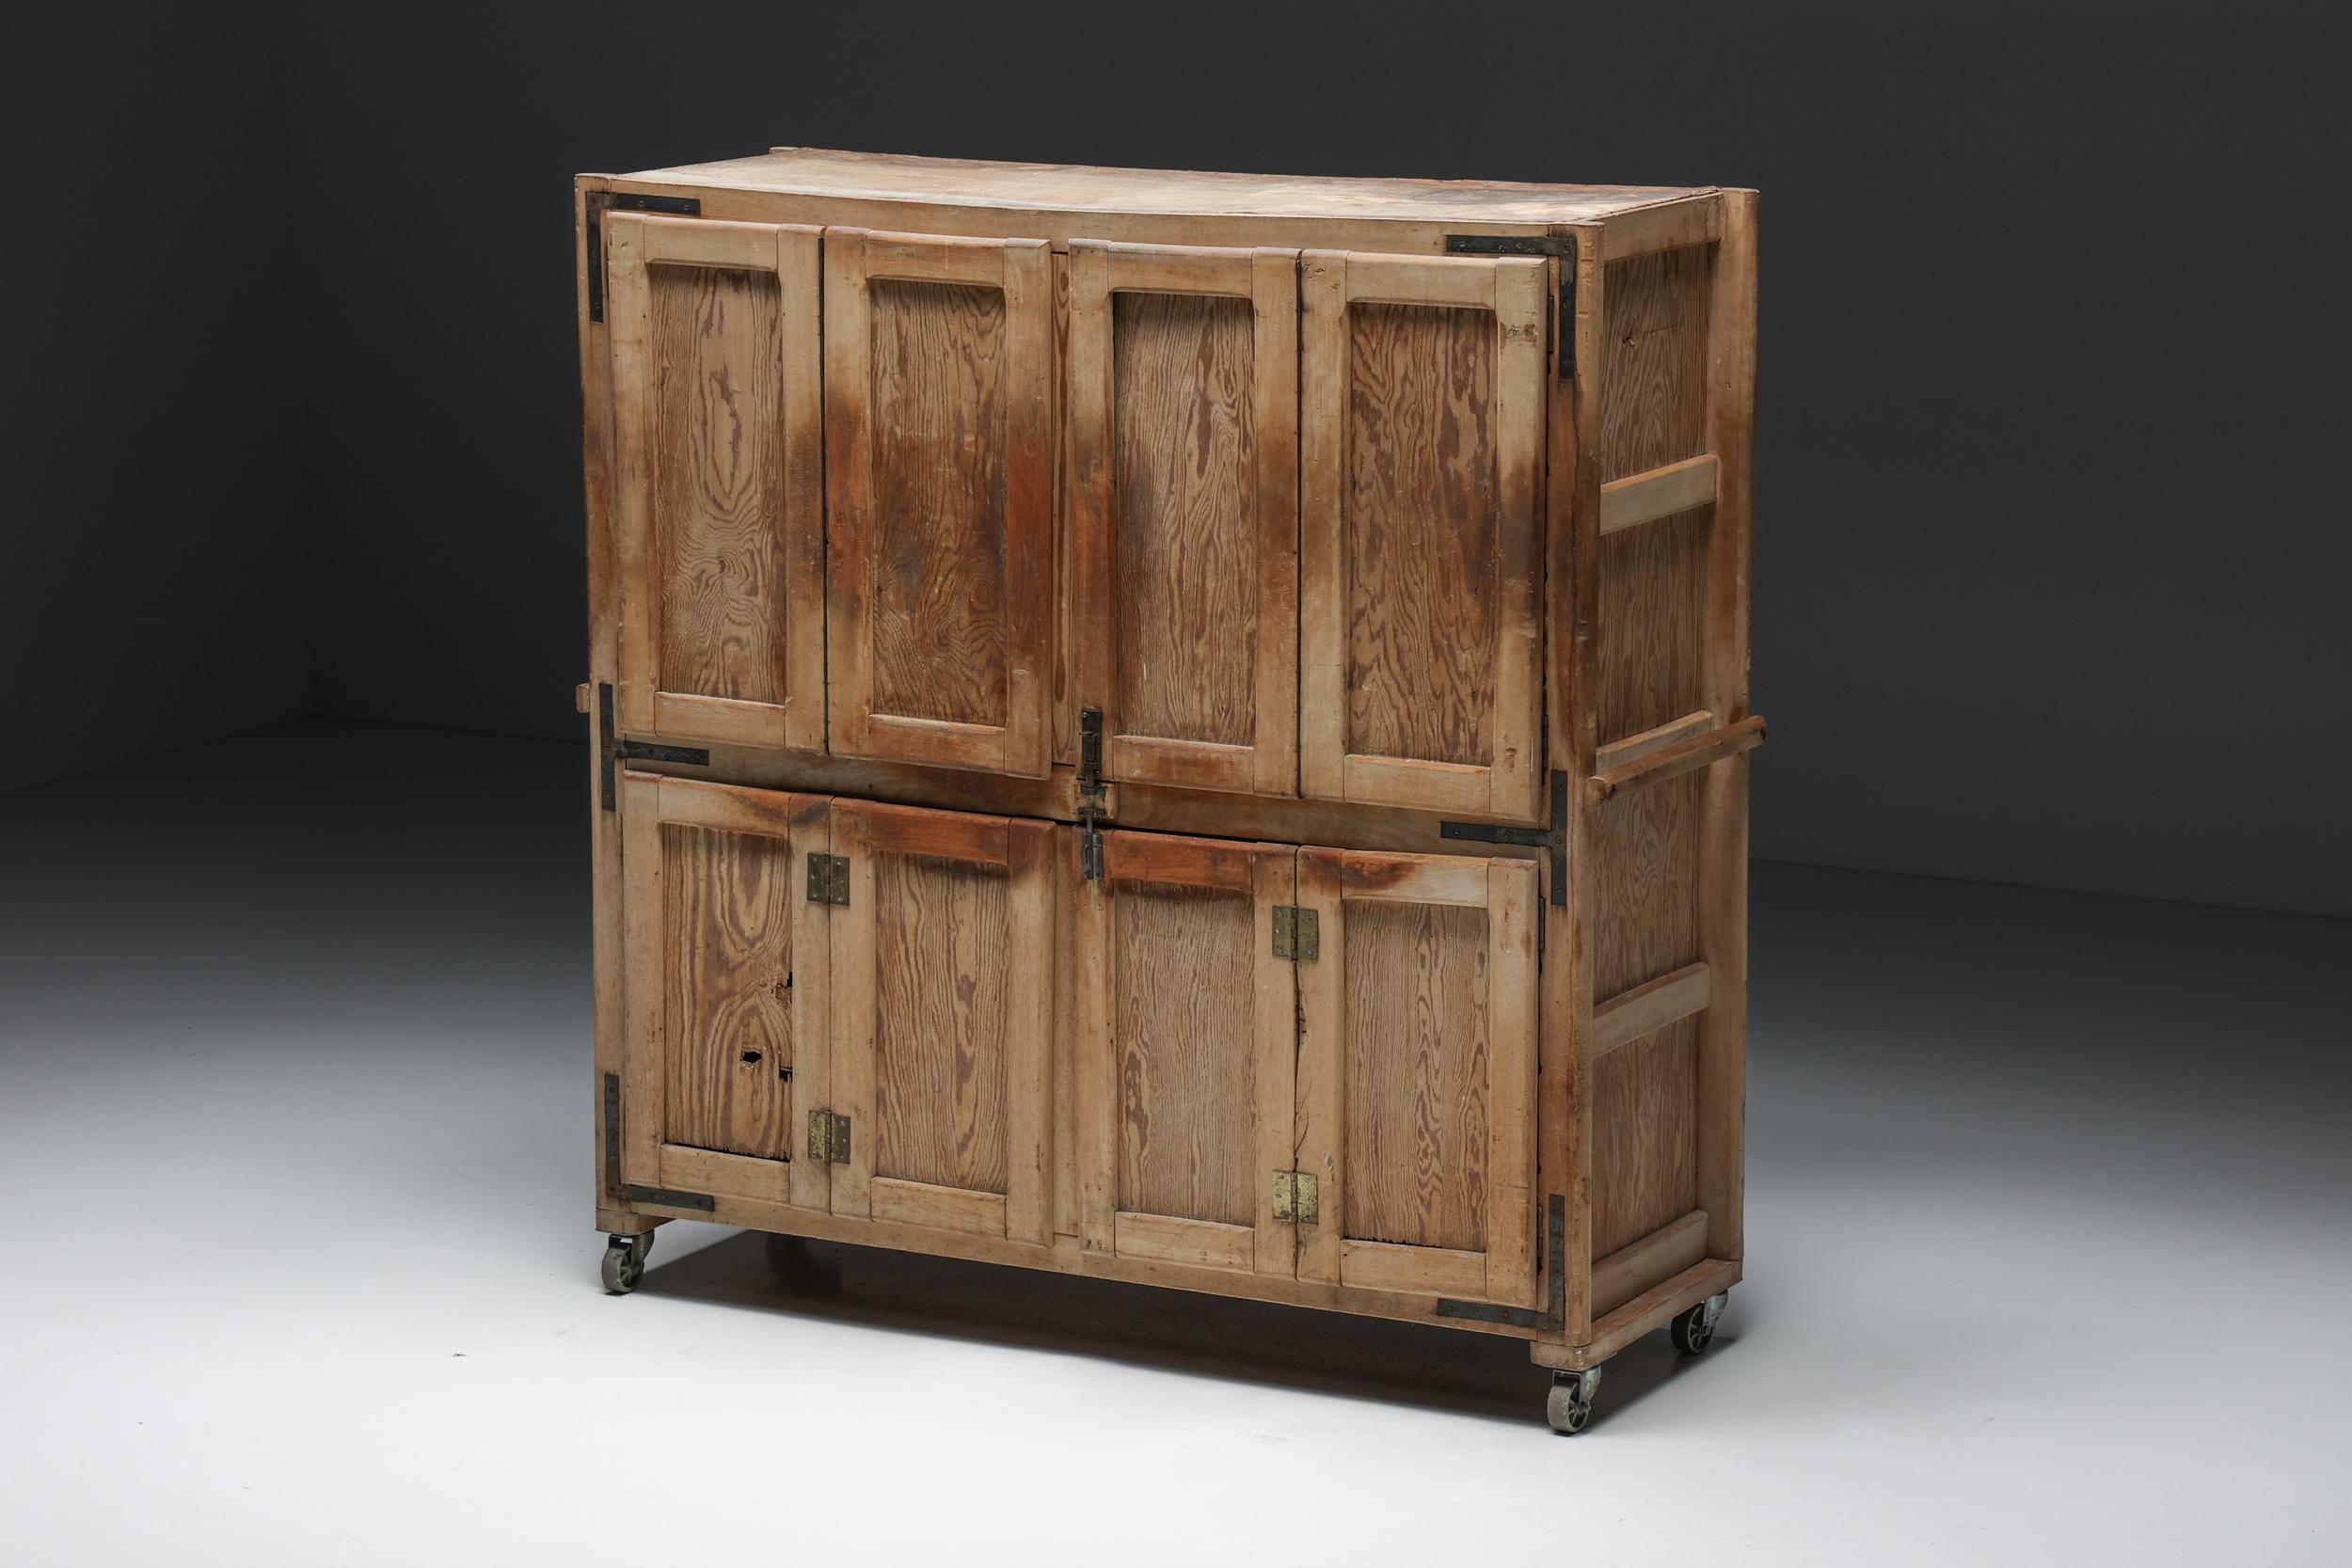 Antique storage piece in oak, early 20th century.

Storage piece, bakery cabinet, made in Europe in the early 20th century. One-of-a-kind piece, originally used to rise bread. Can now be used as a dresser, a wardrobe, or even as a storage piece to